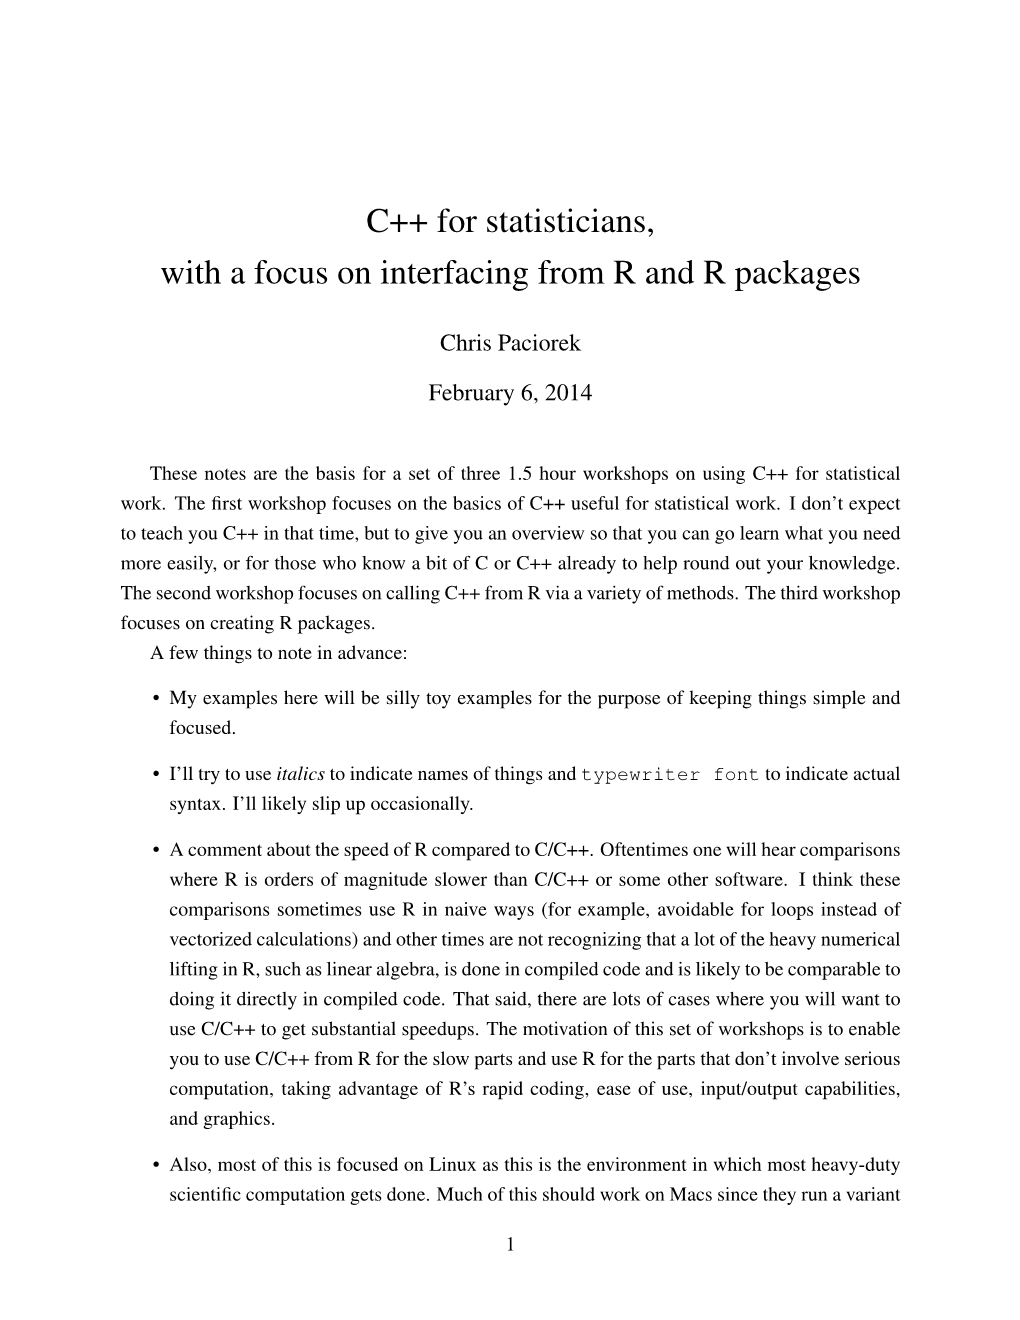 C++ for Statisticians, with a Focus on Interfacing from R and R Packages